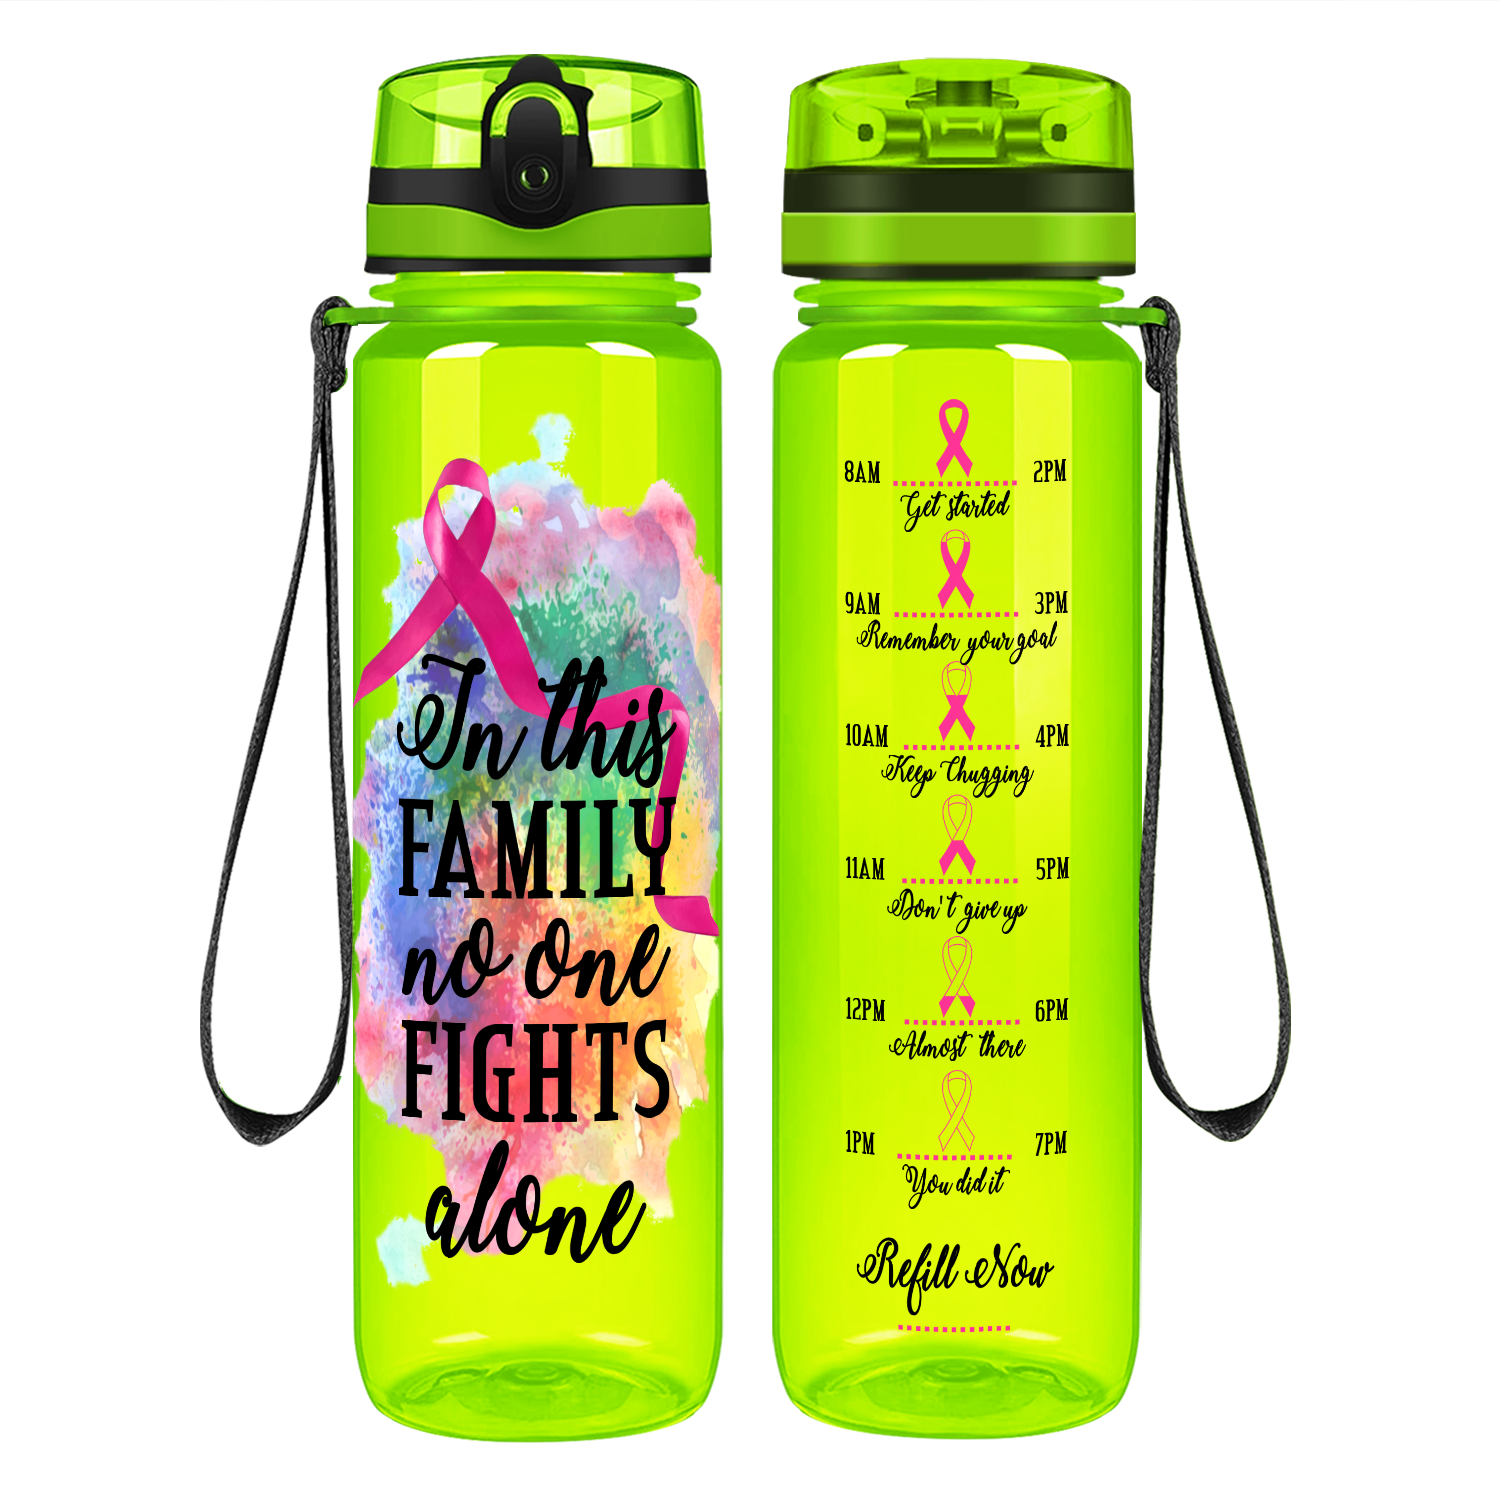 In this Family No One Fights Alone on 32 oz Motivational Tracking Water Bottle